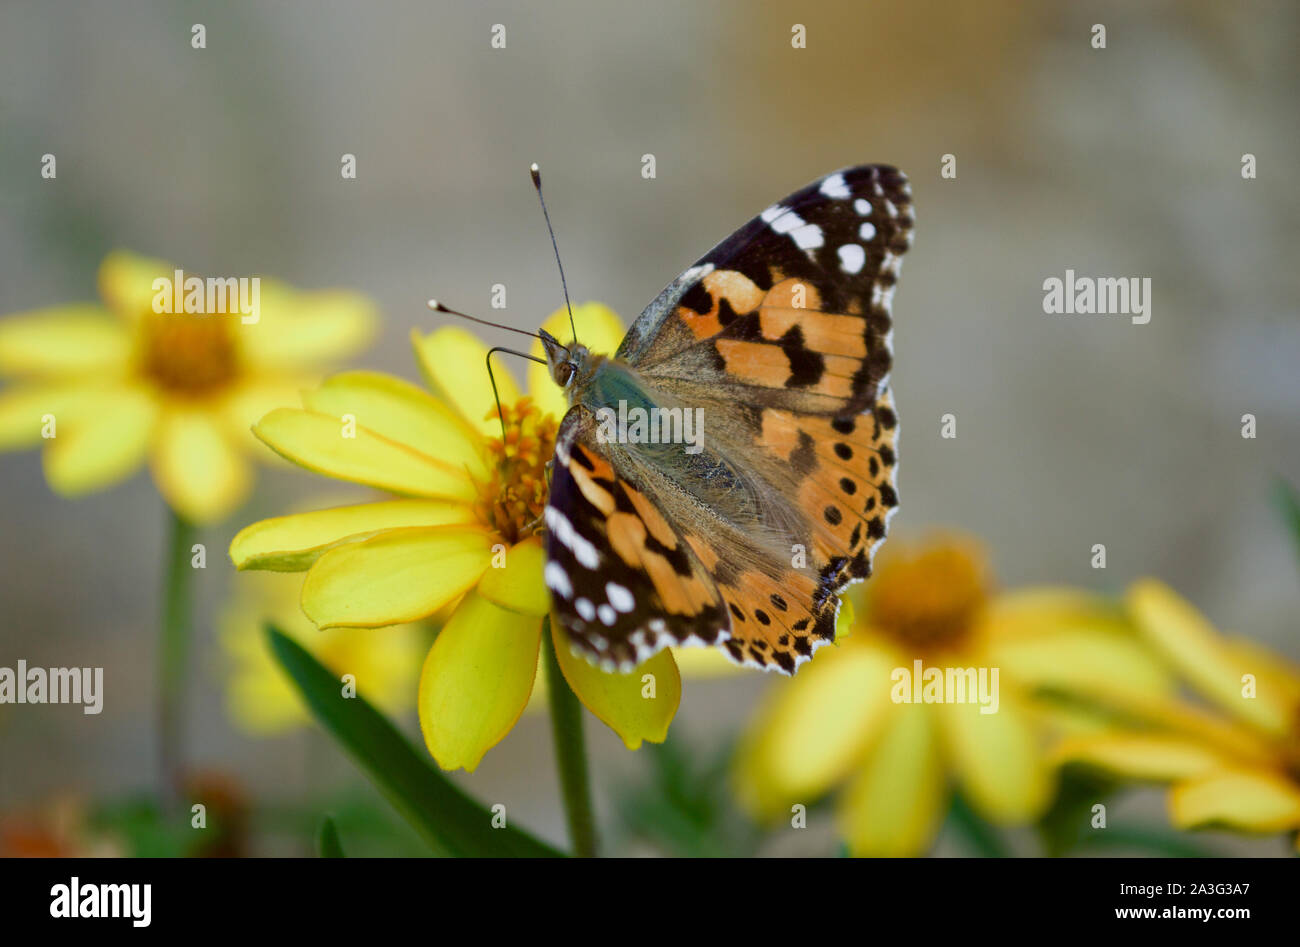 A painted lady butterfly sipping nectar from a flower Stock Photo